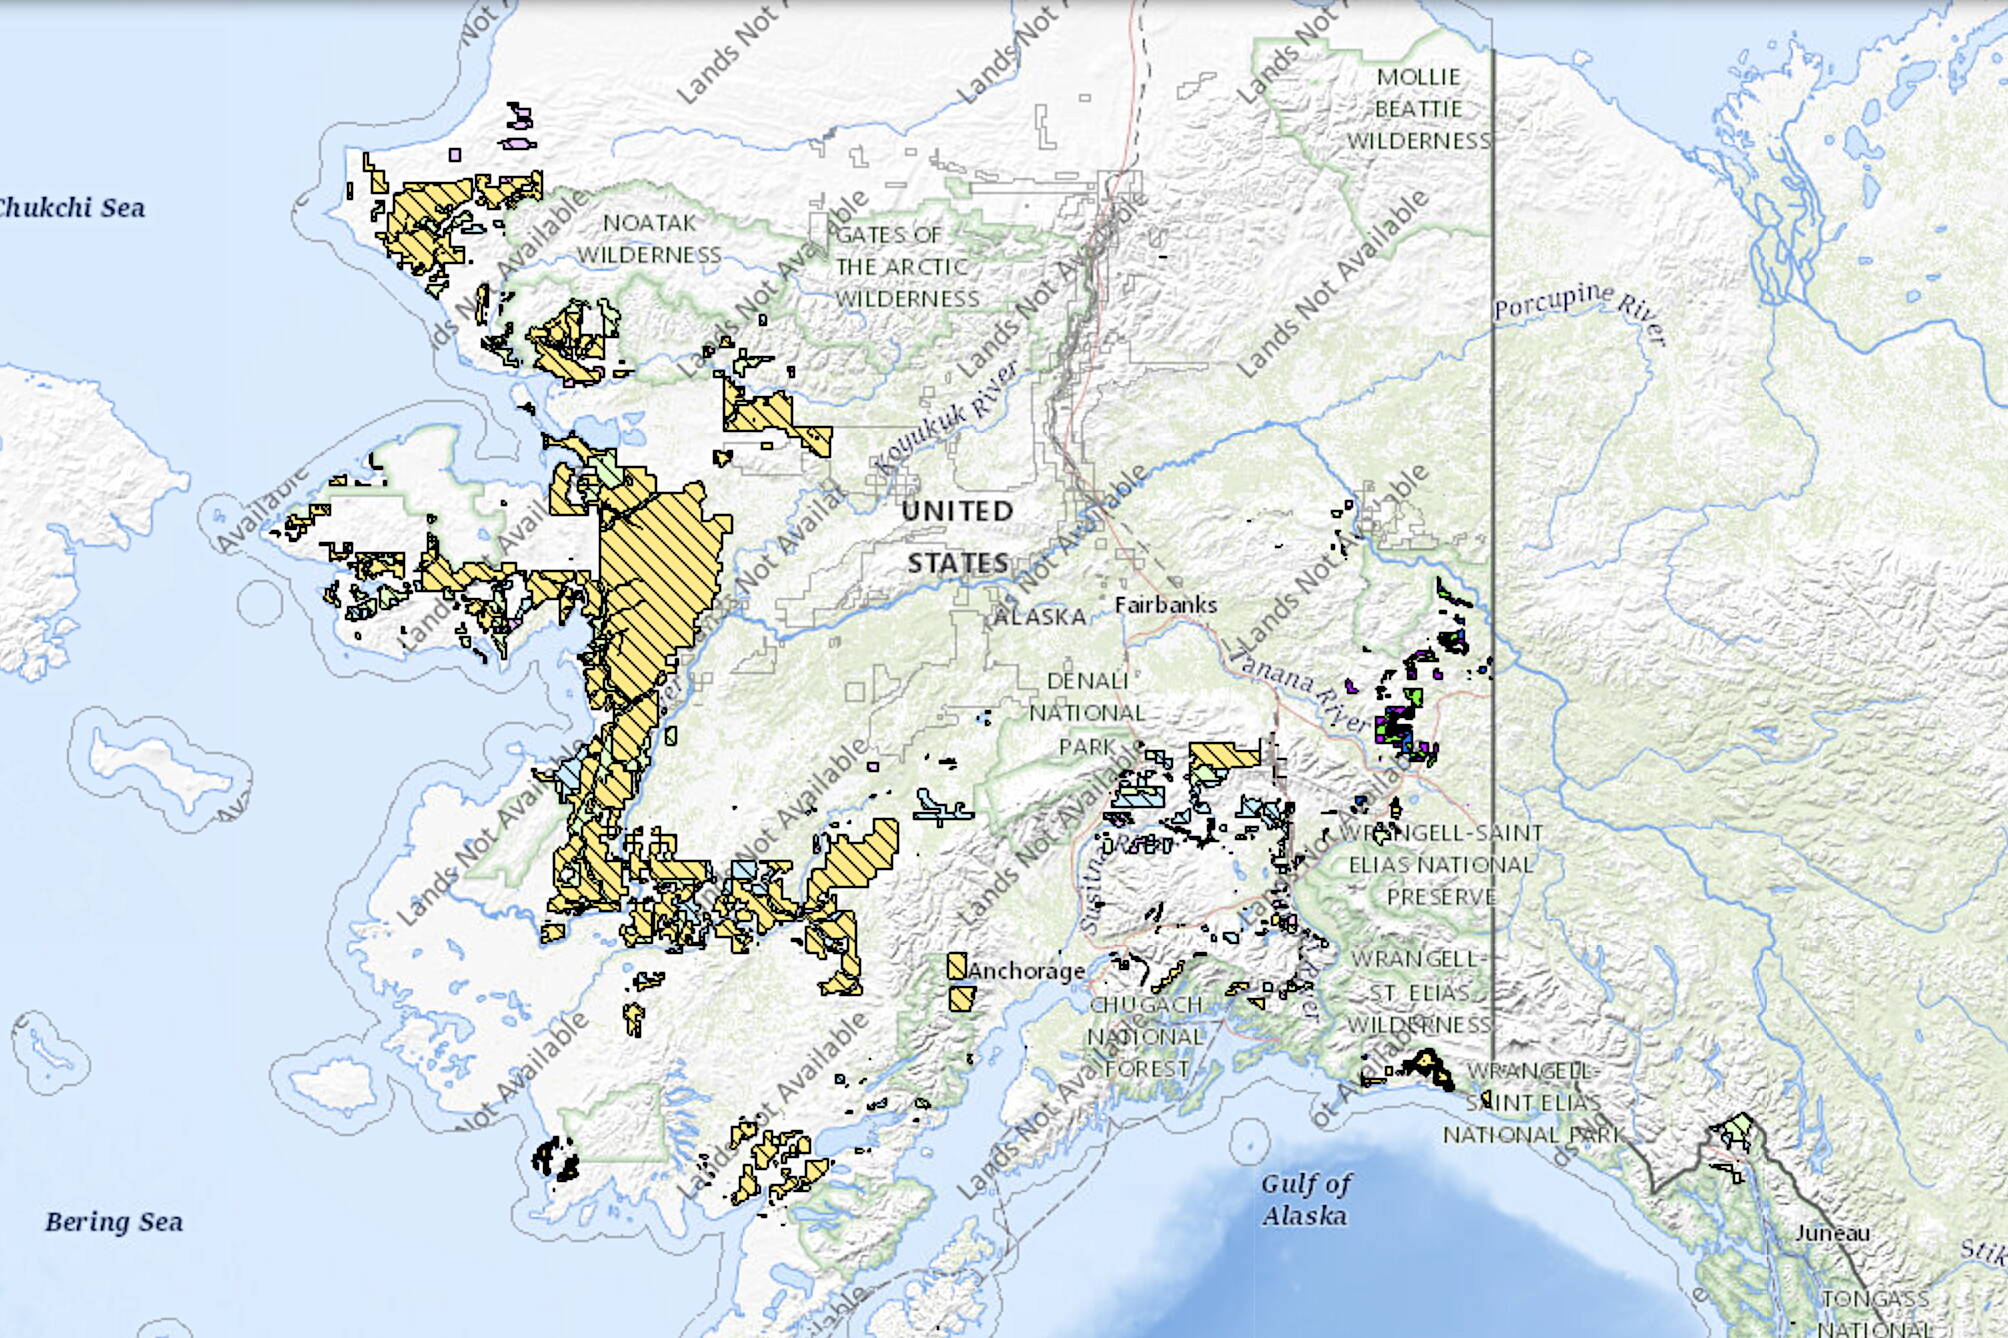 A map shows land tracts where Alaska Native Vietnam veterans can apply for parcels under an allocation program finalized this month by the U.S. Bureau of Land Management. The most common land parcels potentially available are shaded in light yellow. Areas shaded in light green, including the ones nearest Juneau, represent potentially available state selected land. Applications processing and selection by the bureau is scheduled to start Sept. 14. (U.S. Bureau of Land Management)